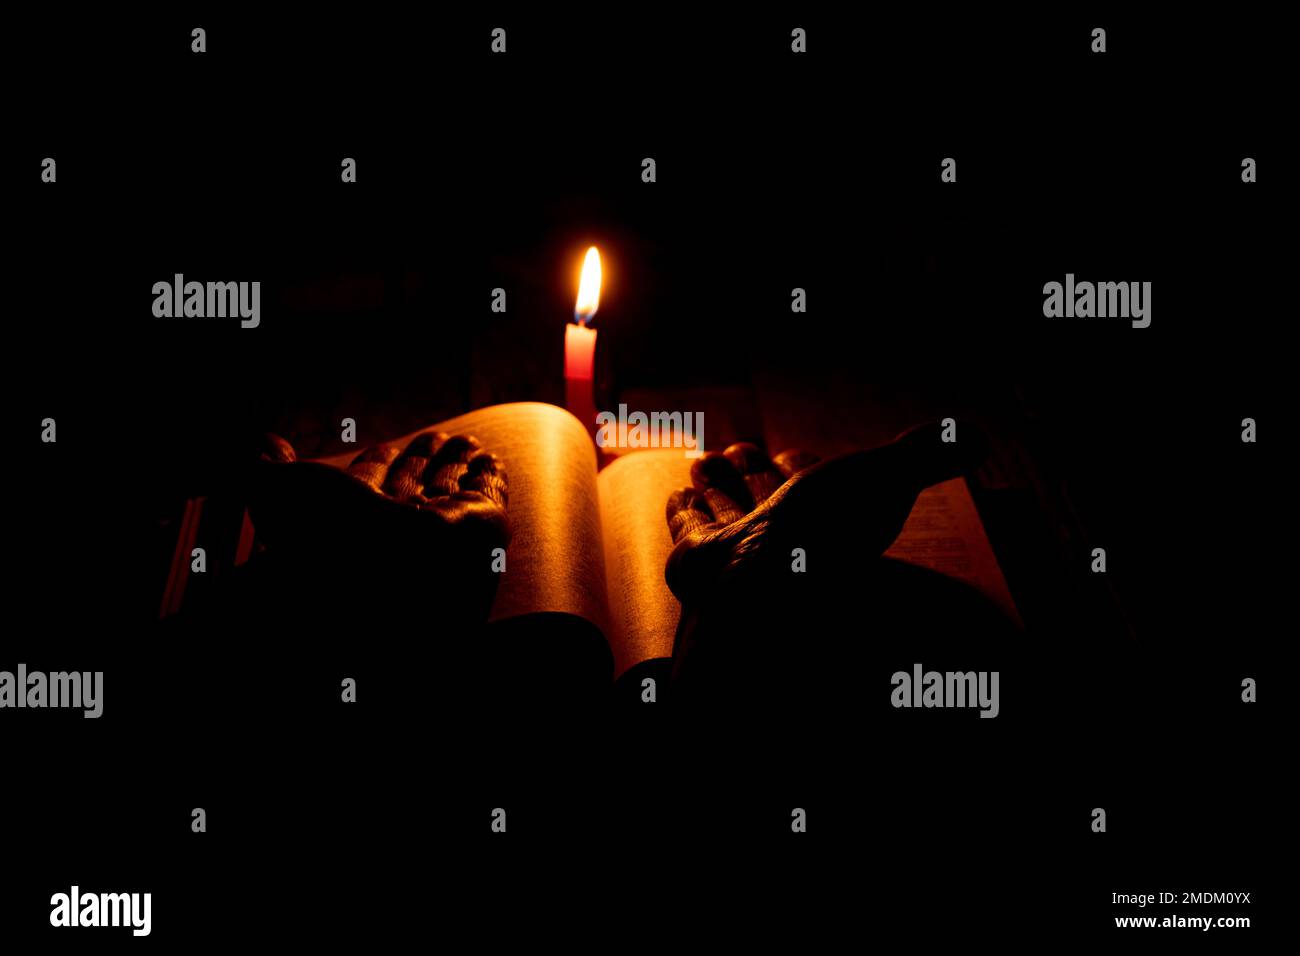 bible lies a candle flame of a candle in the dark, pray a bible, hands on a book and a candle flame at night, religion Stock Photo